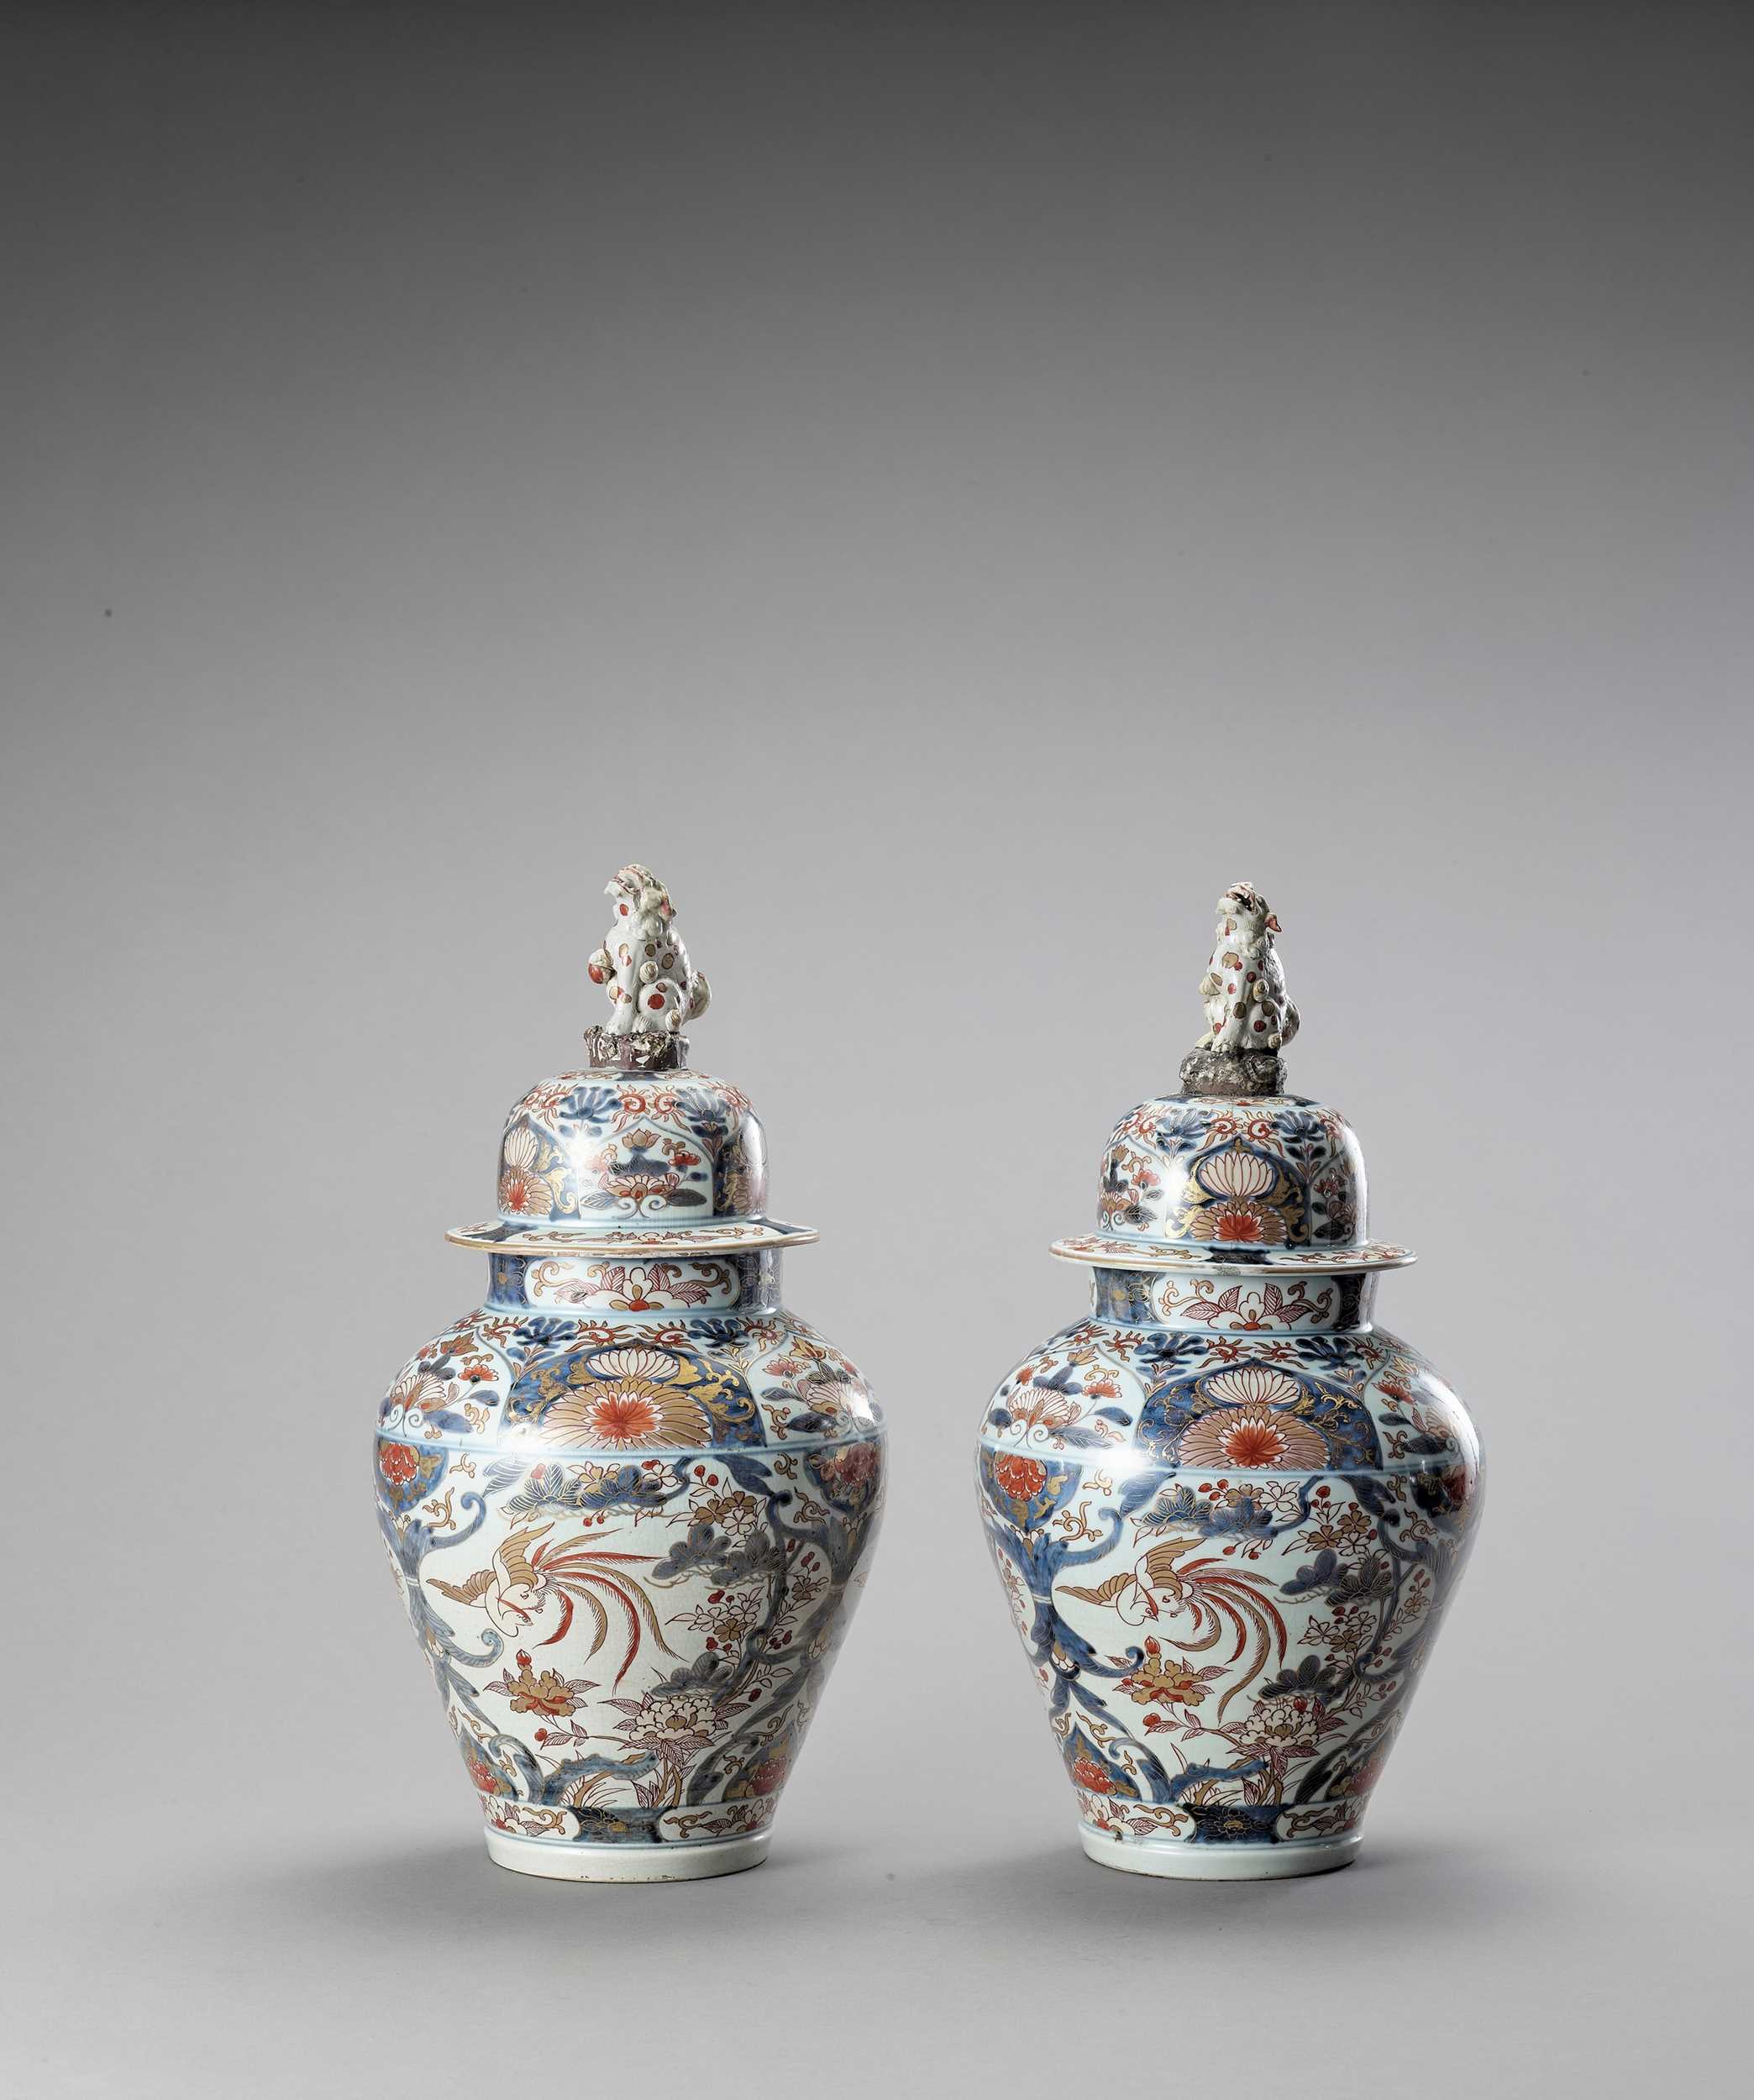 Lot 1061 - A LARGE PAIR OF IMARI PORCELAIN VASES AND COVERS